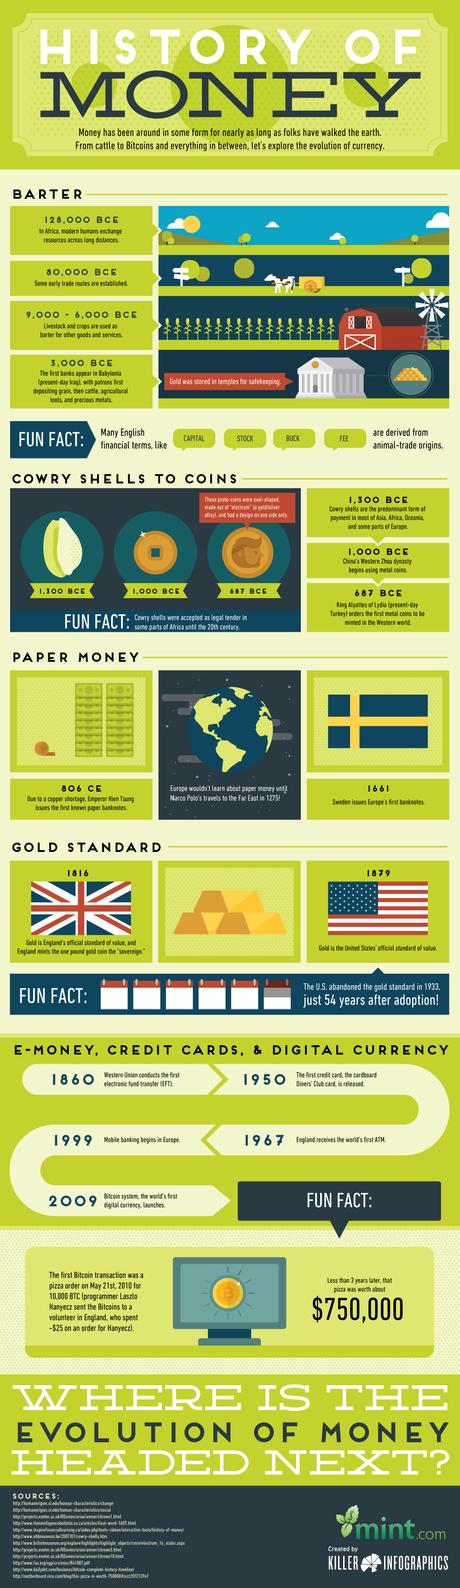 The History of money